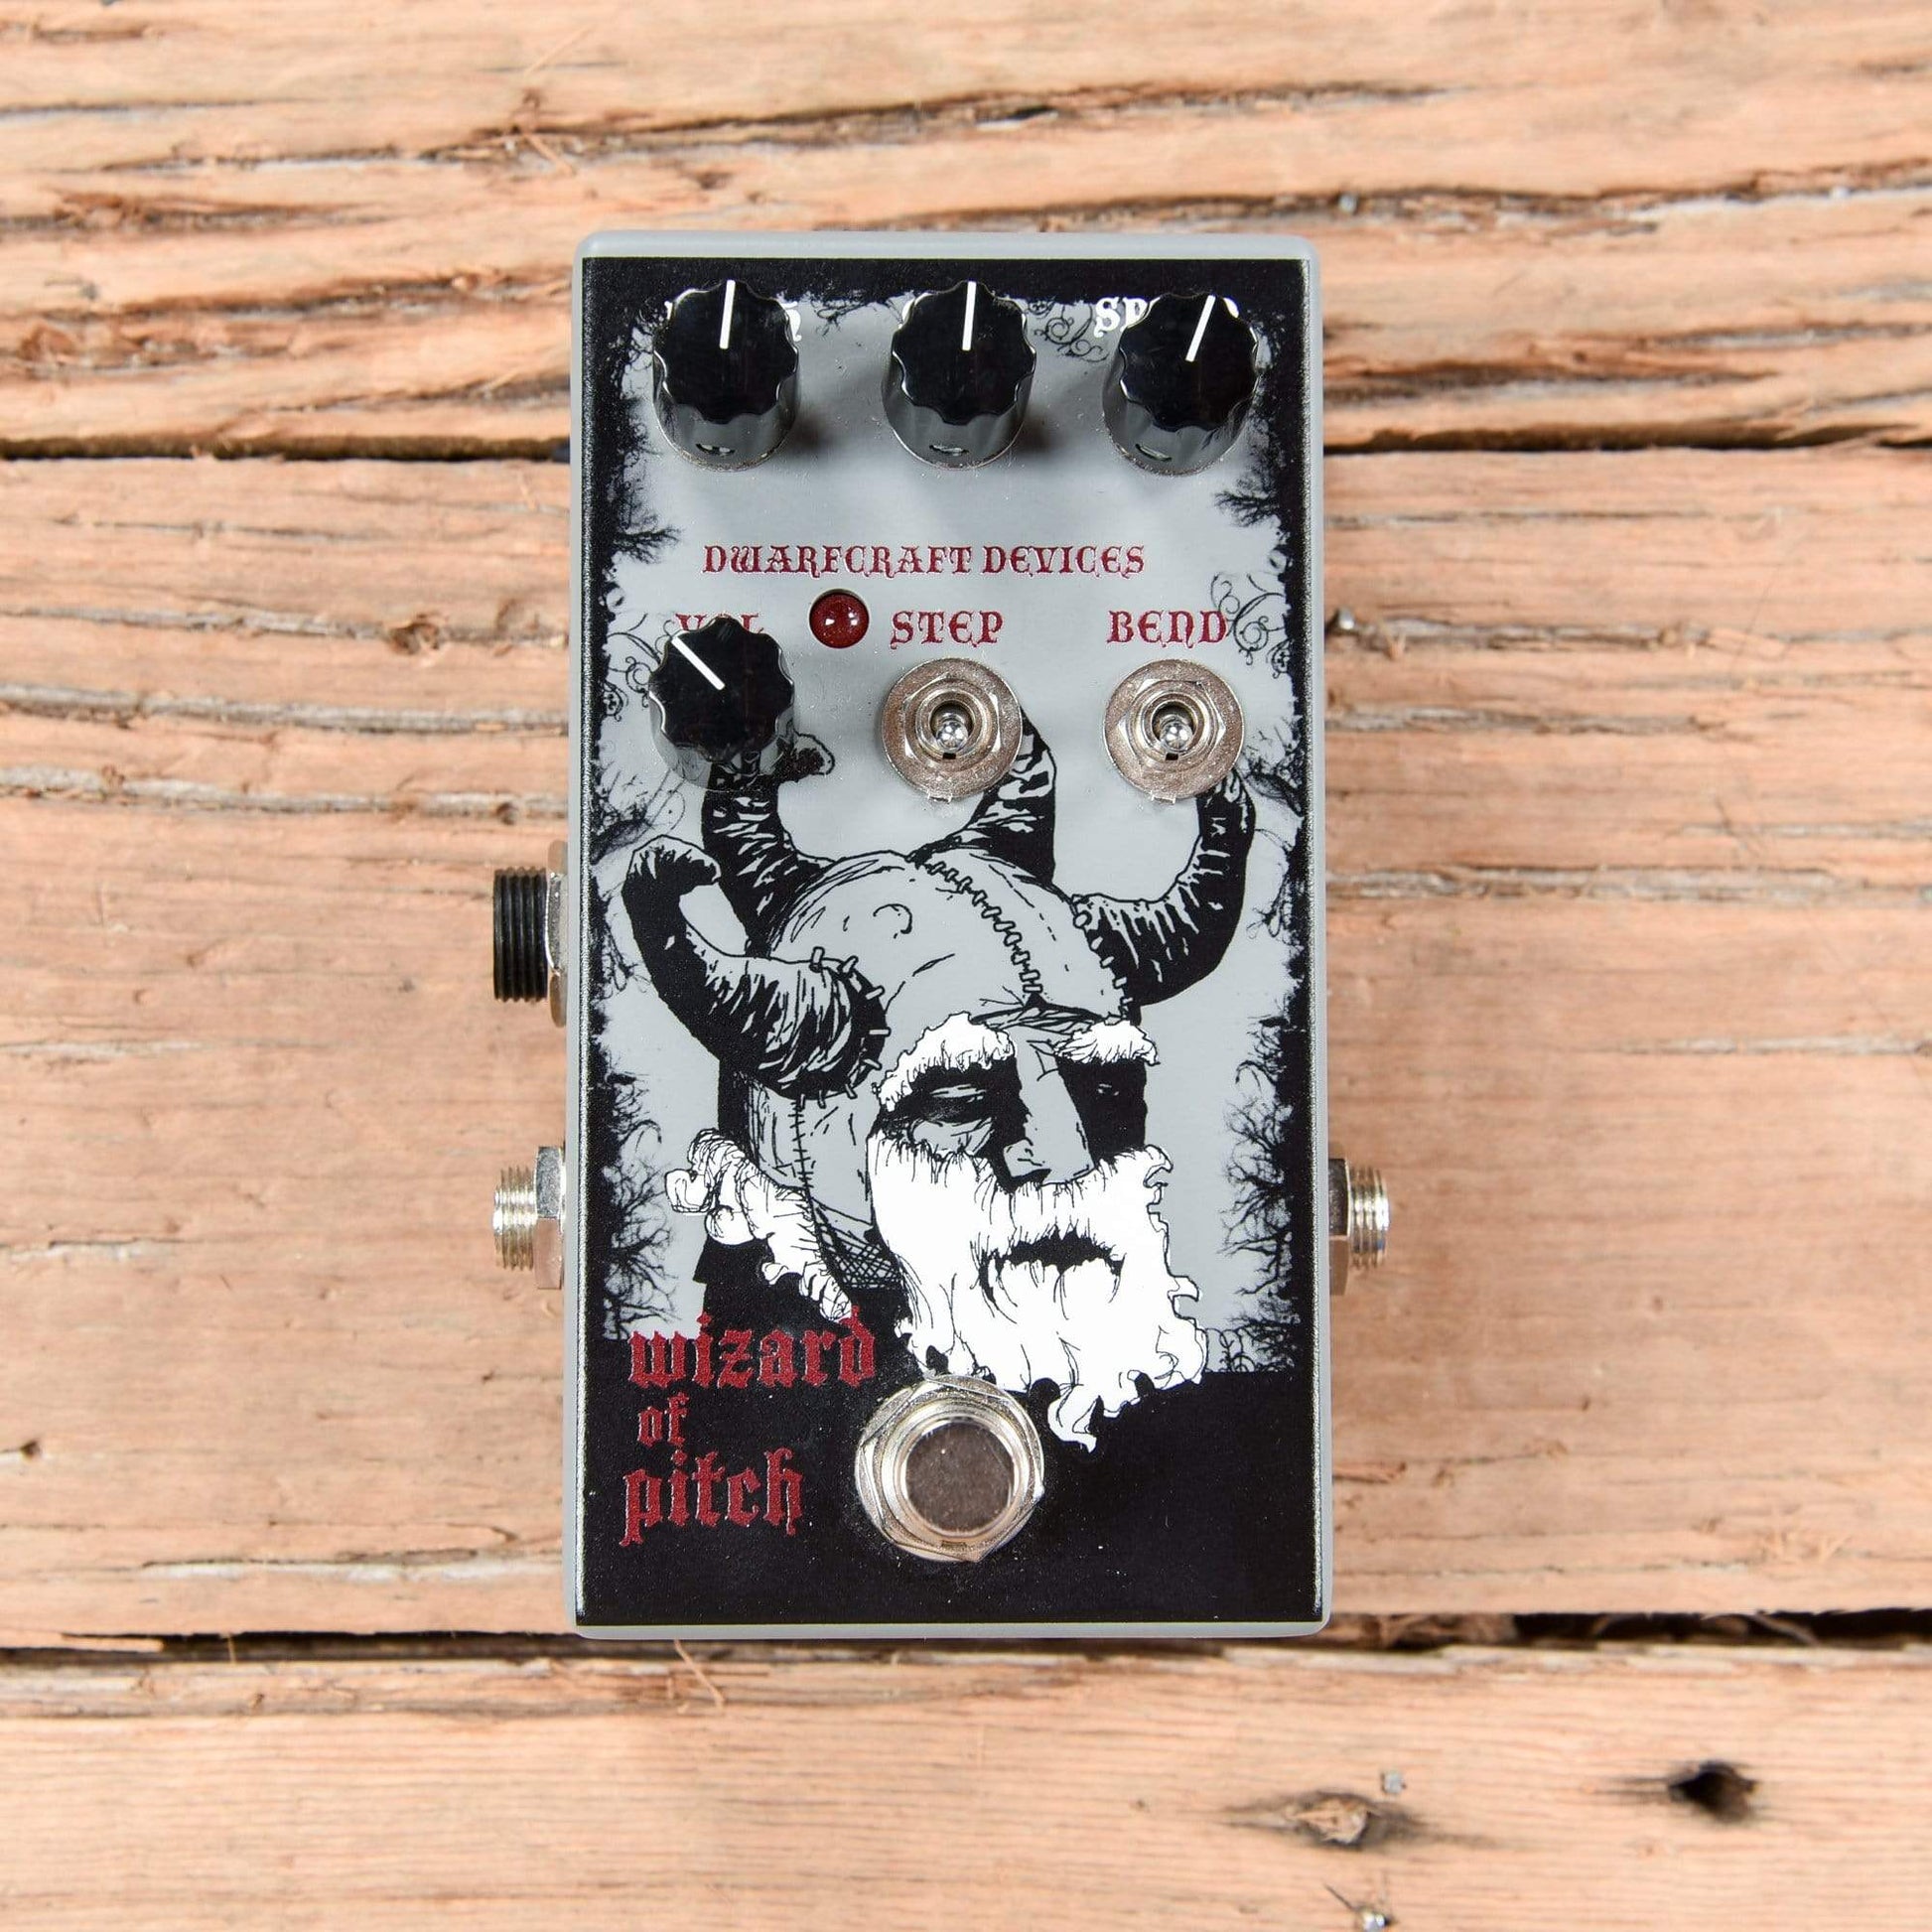 Dwarfcraft Wizard Of Pitch Effects and Pedals / Octave and Pitch